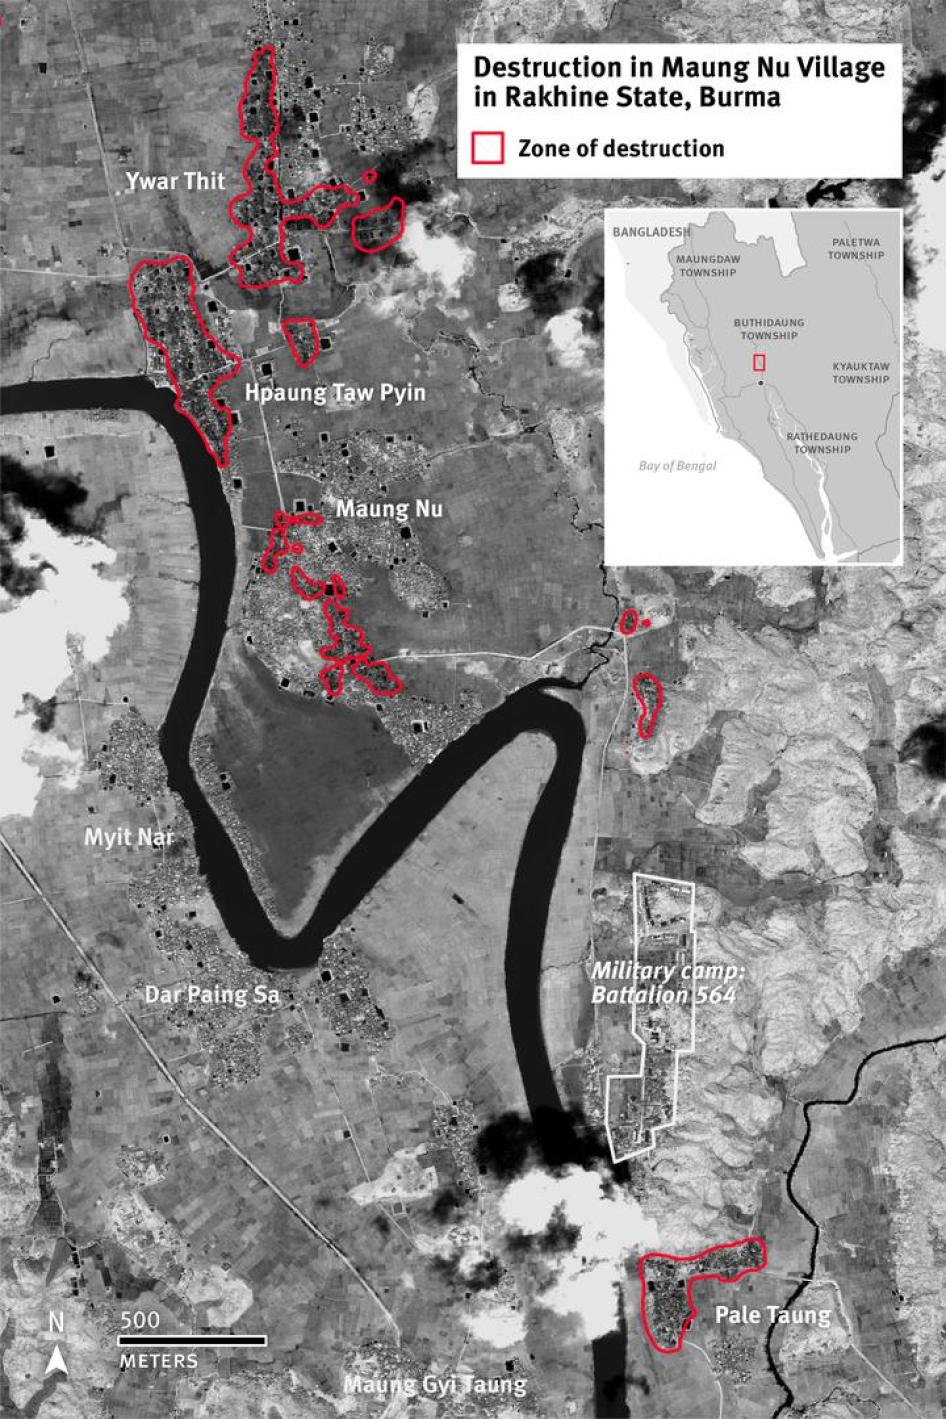 Satellite imagery showing the destruction in Maung Nu Village, Rakhine State, since August 2017.